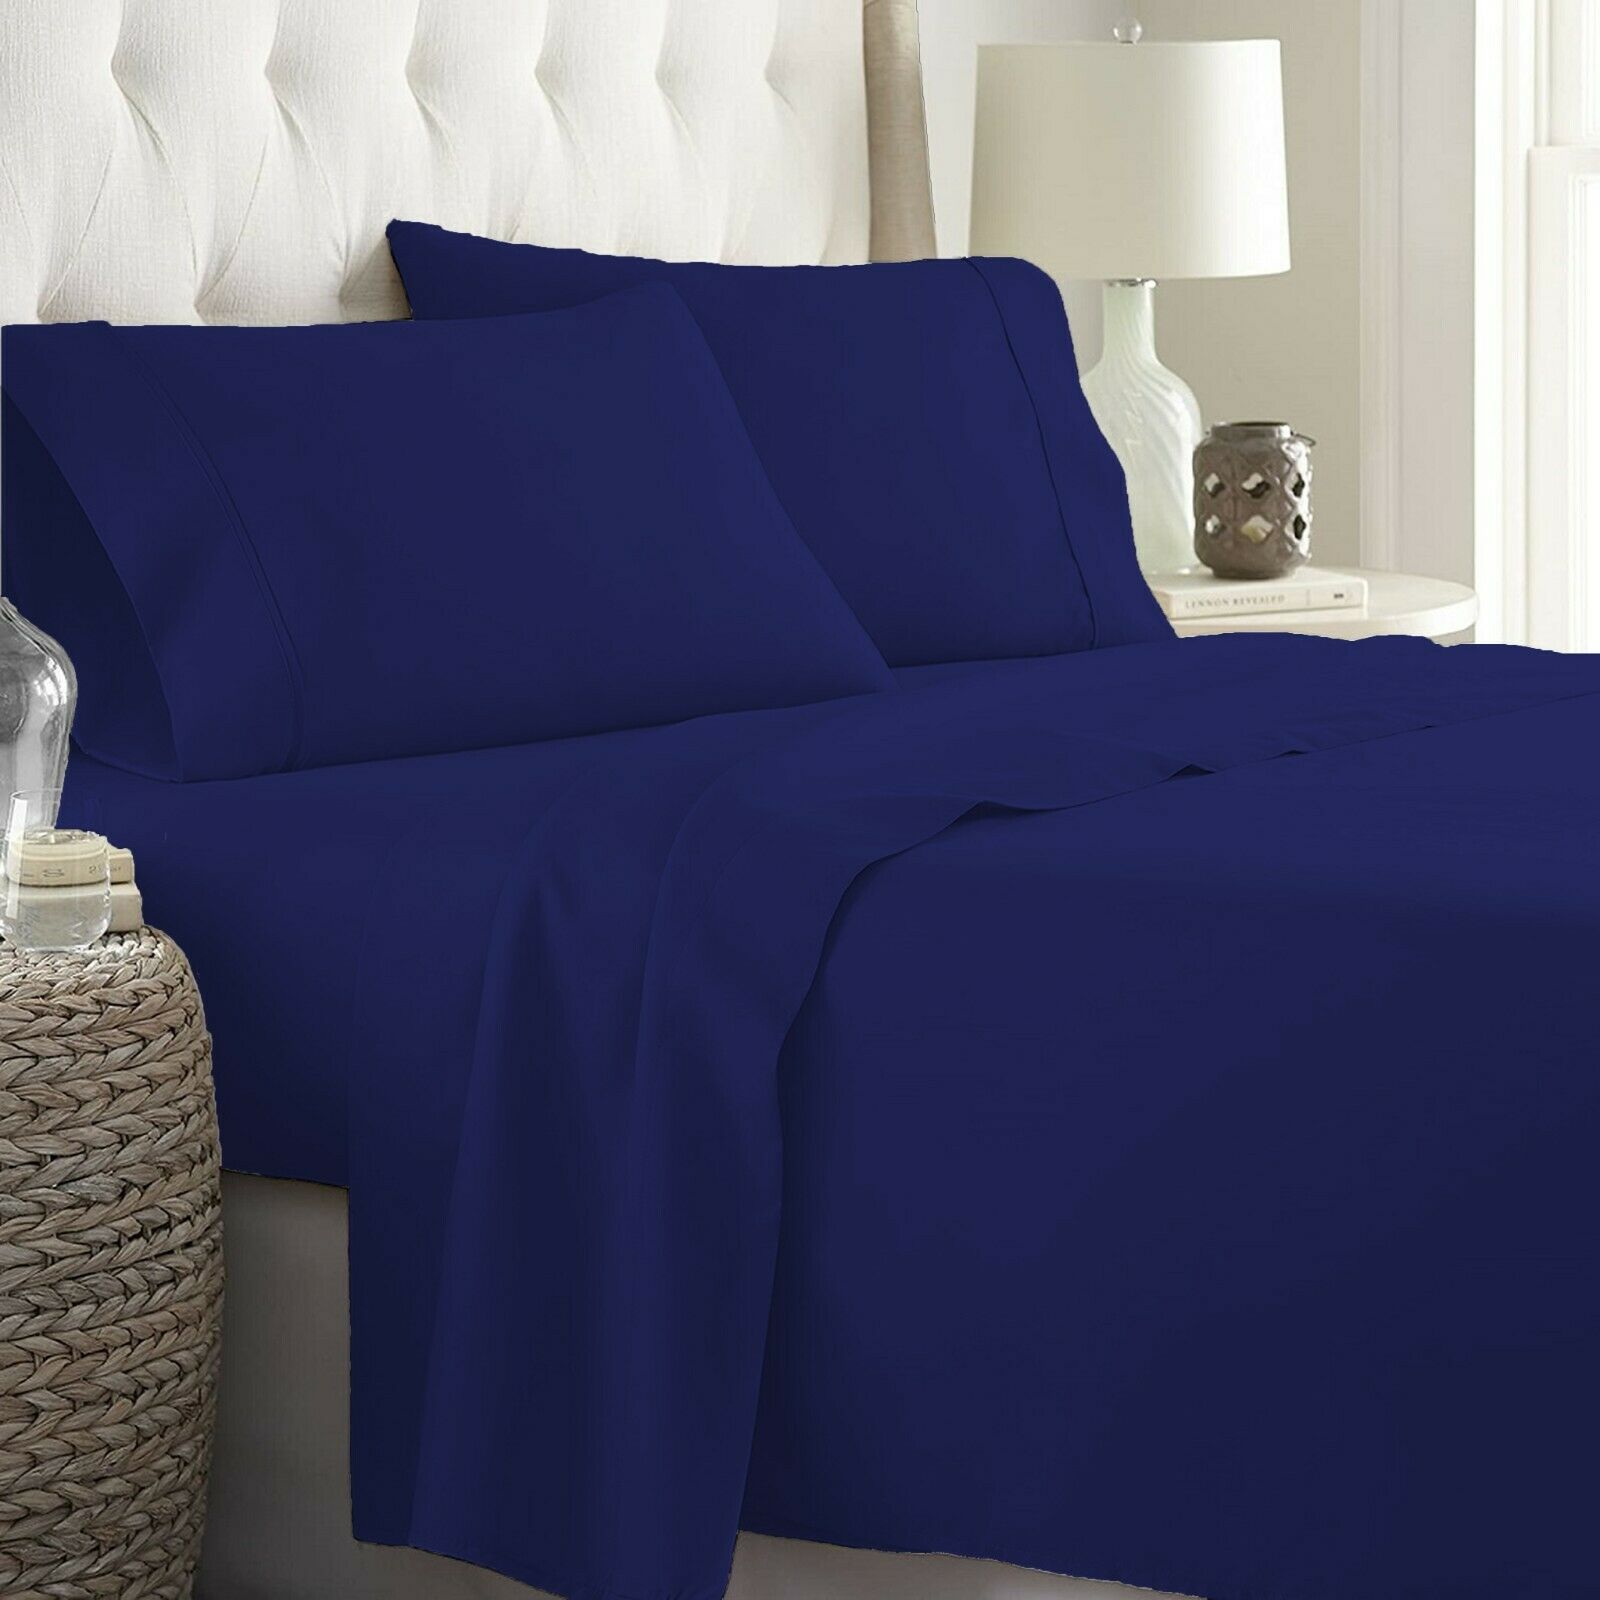 36 Inch Deep Pocket Fitted Sheet Navy Egyptian Cotton at-EgyptianHomeLinens.com